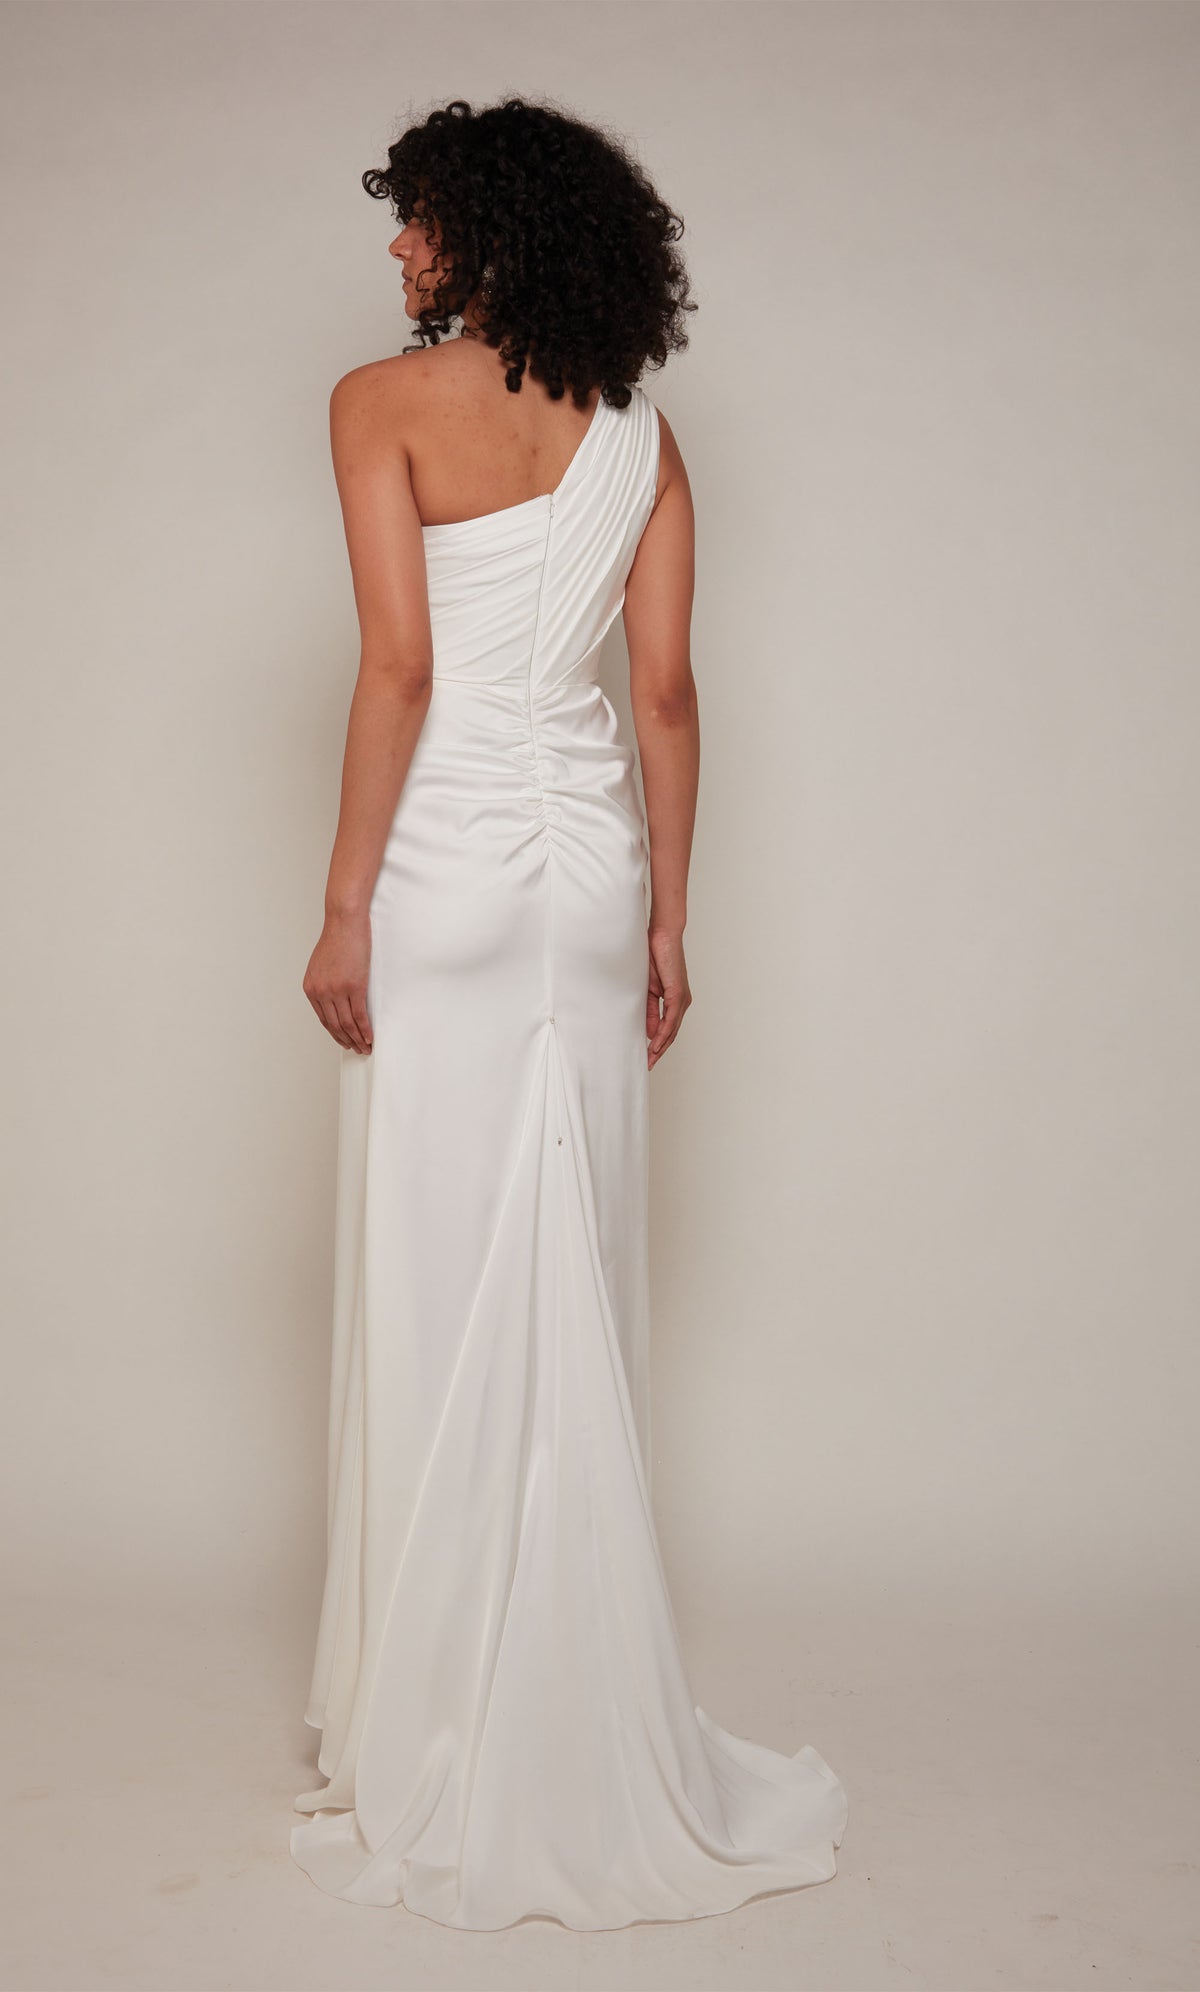 An elegant, satin one shoulder gown with ruching detail, a closed zipper back, and train in the color diamond white.